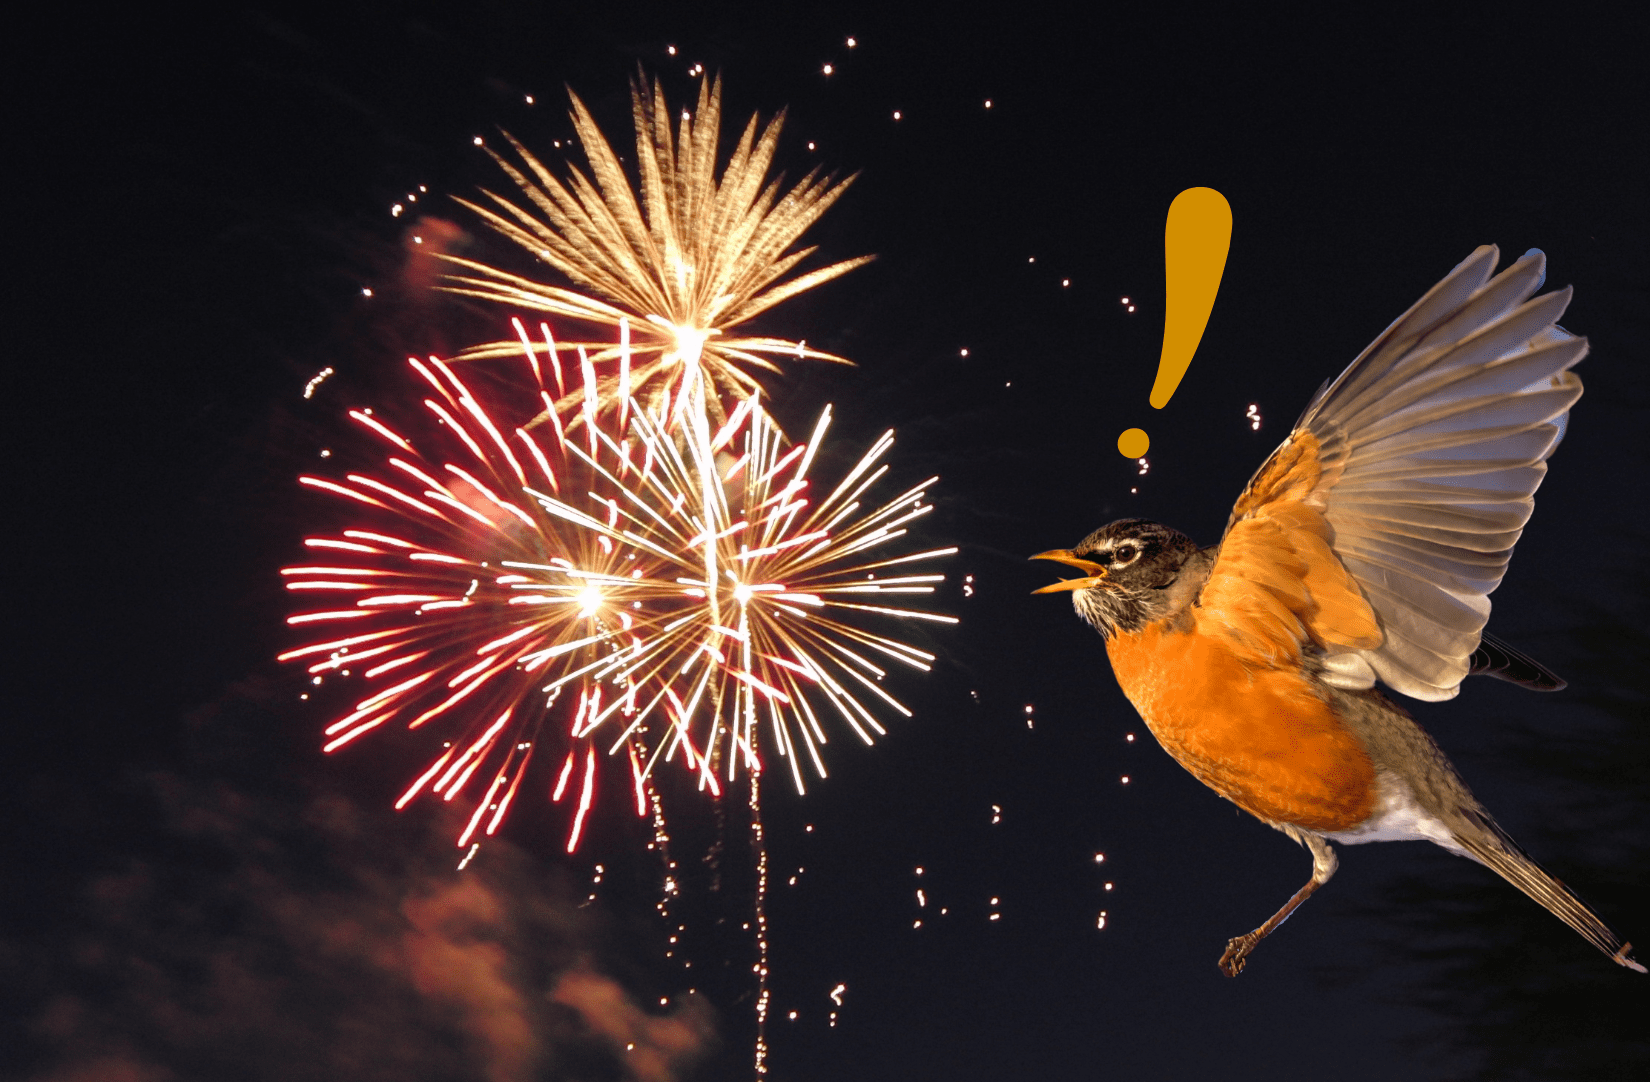 American robin alarmed by fireworks in the sky